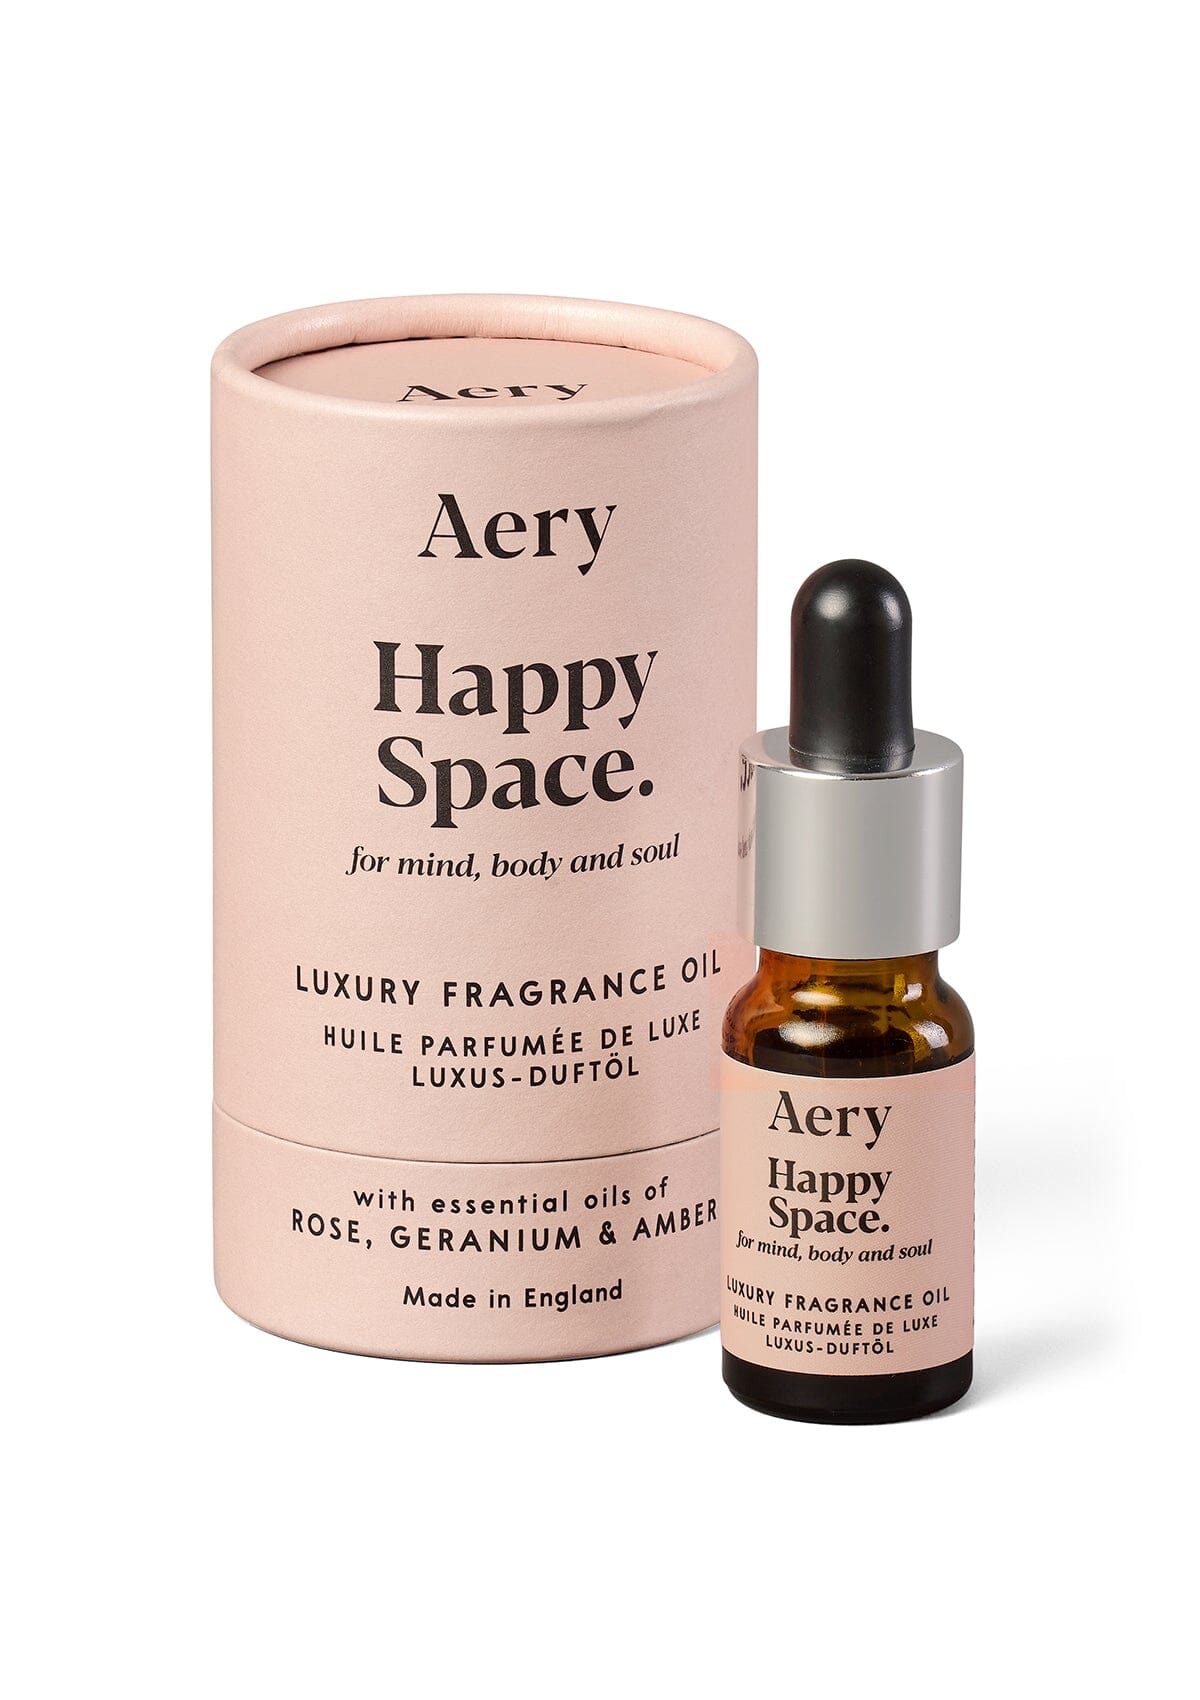 Pink Happy Space fragrance oil by Aery displayed next to product packaging 